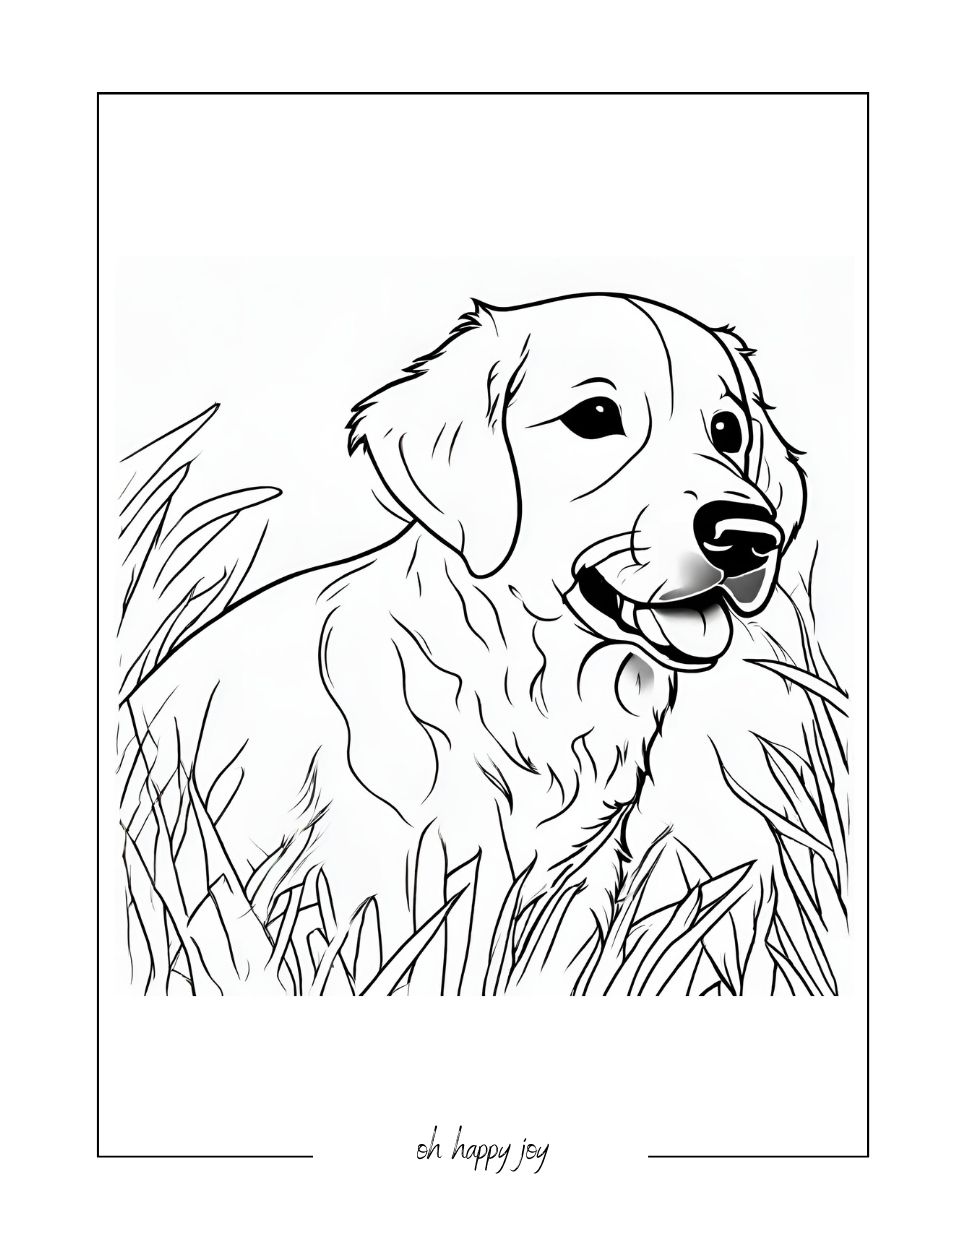 golden retriever in grass coloring page